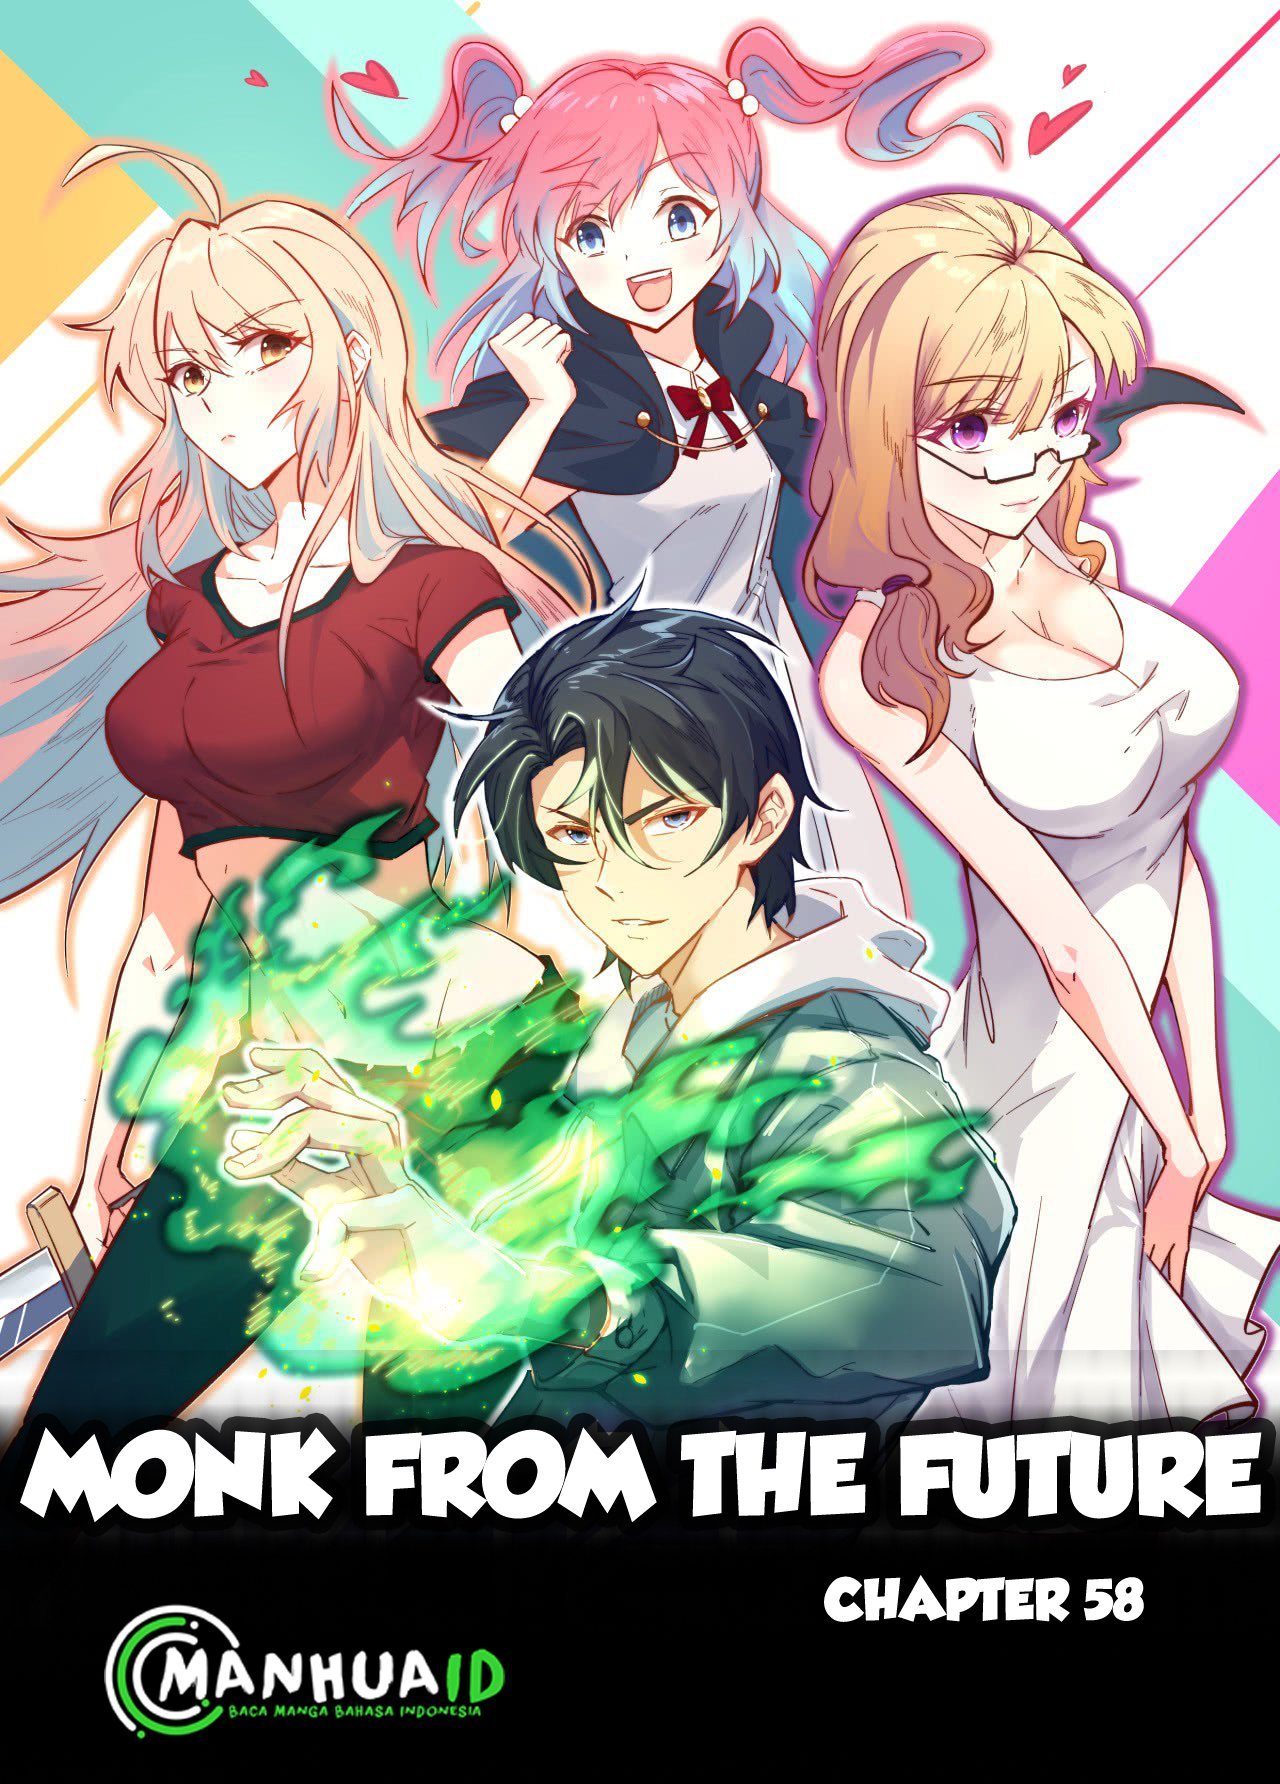 Monk From the Future Chapter 58